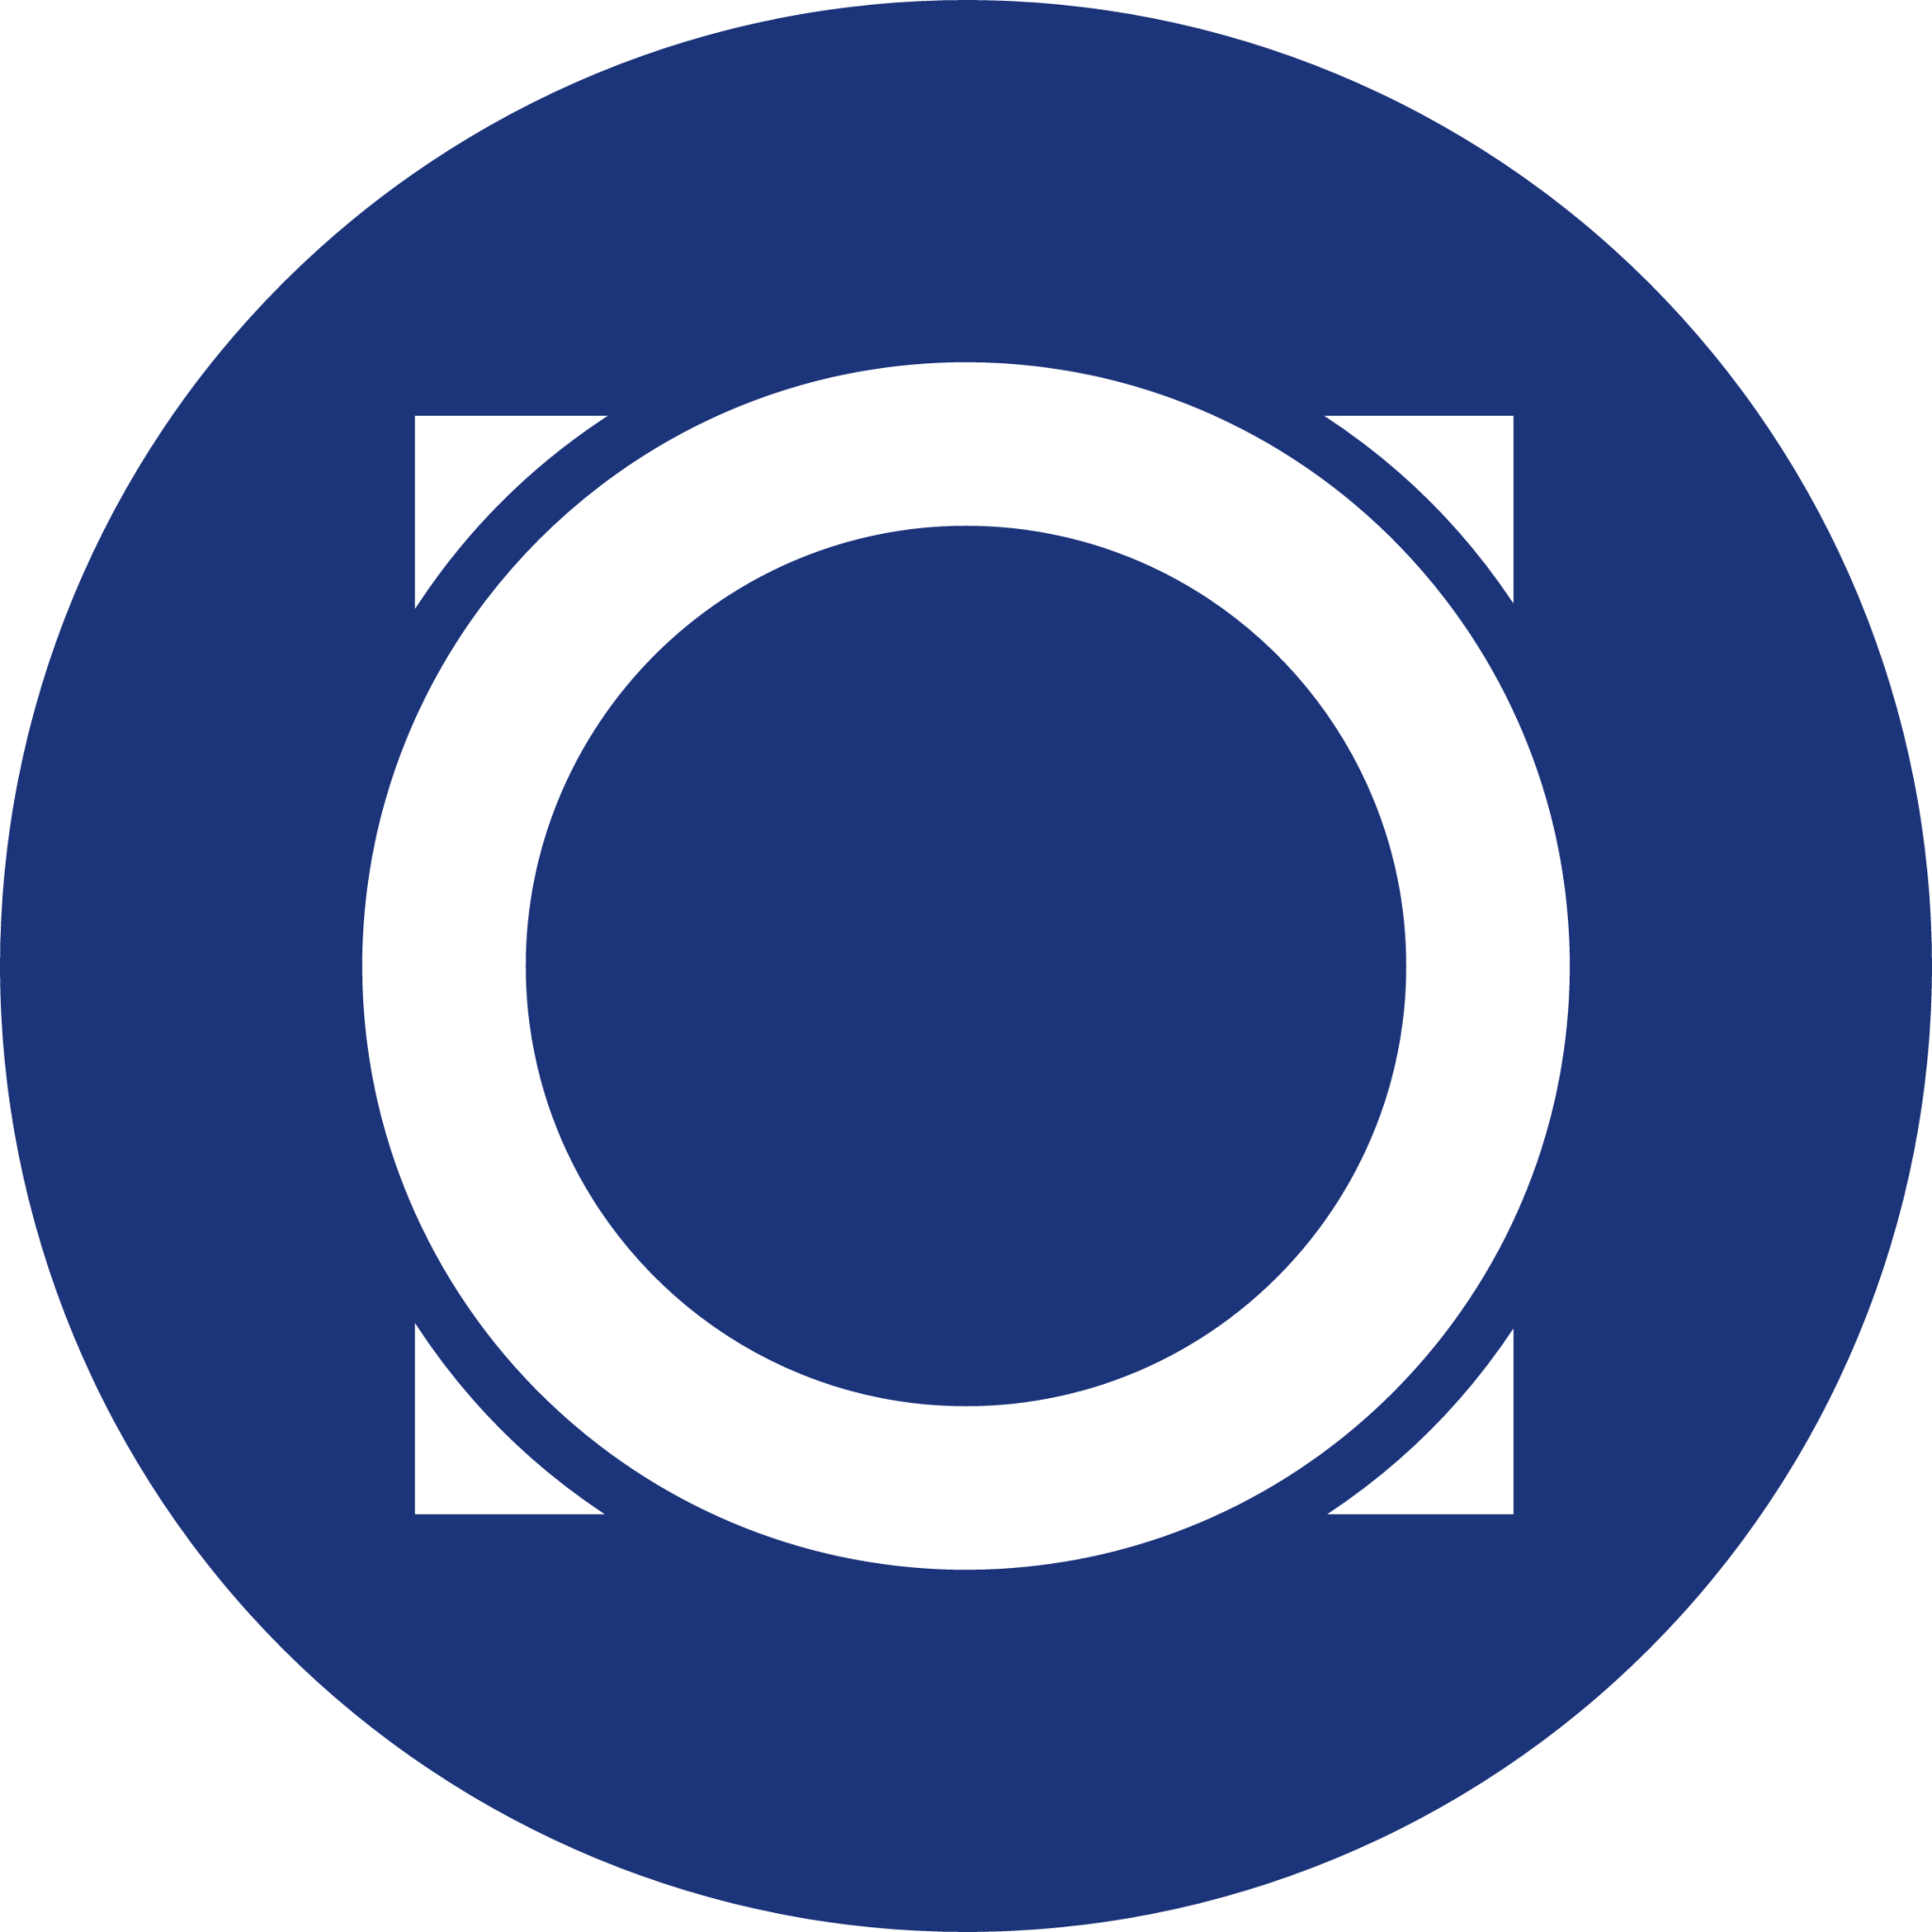 Omni Cryptocurrency icon